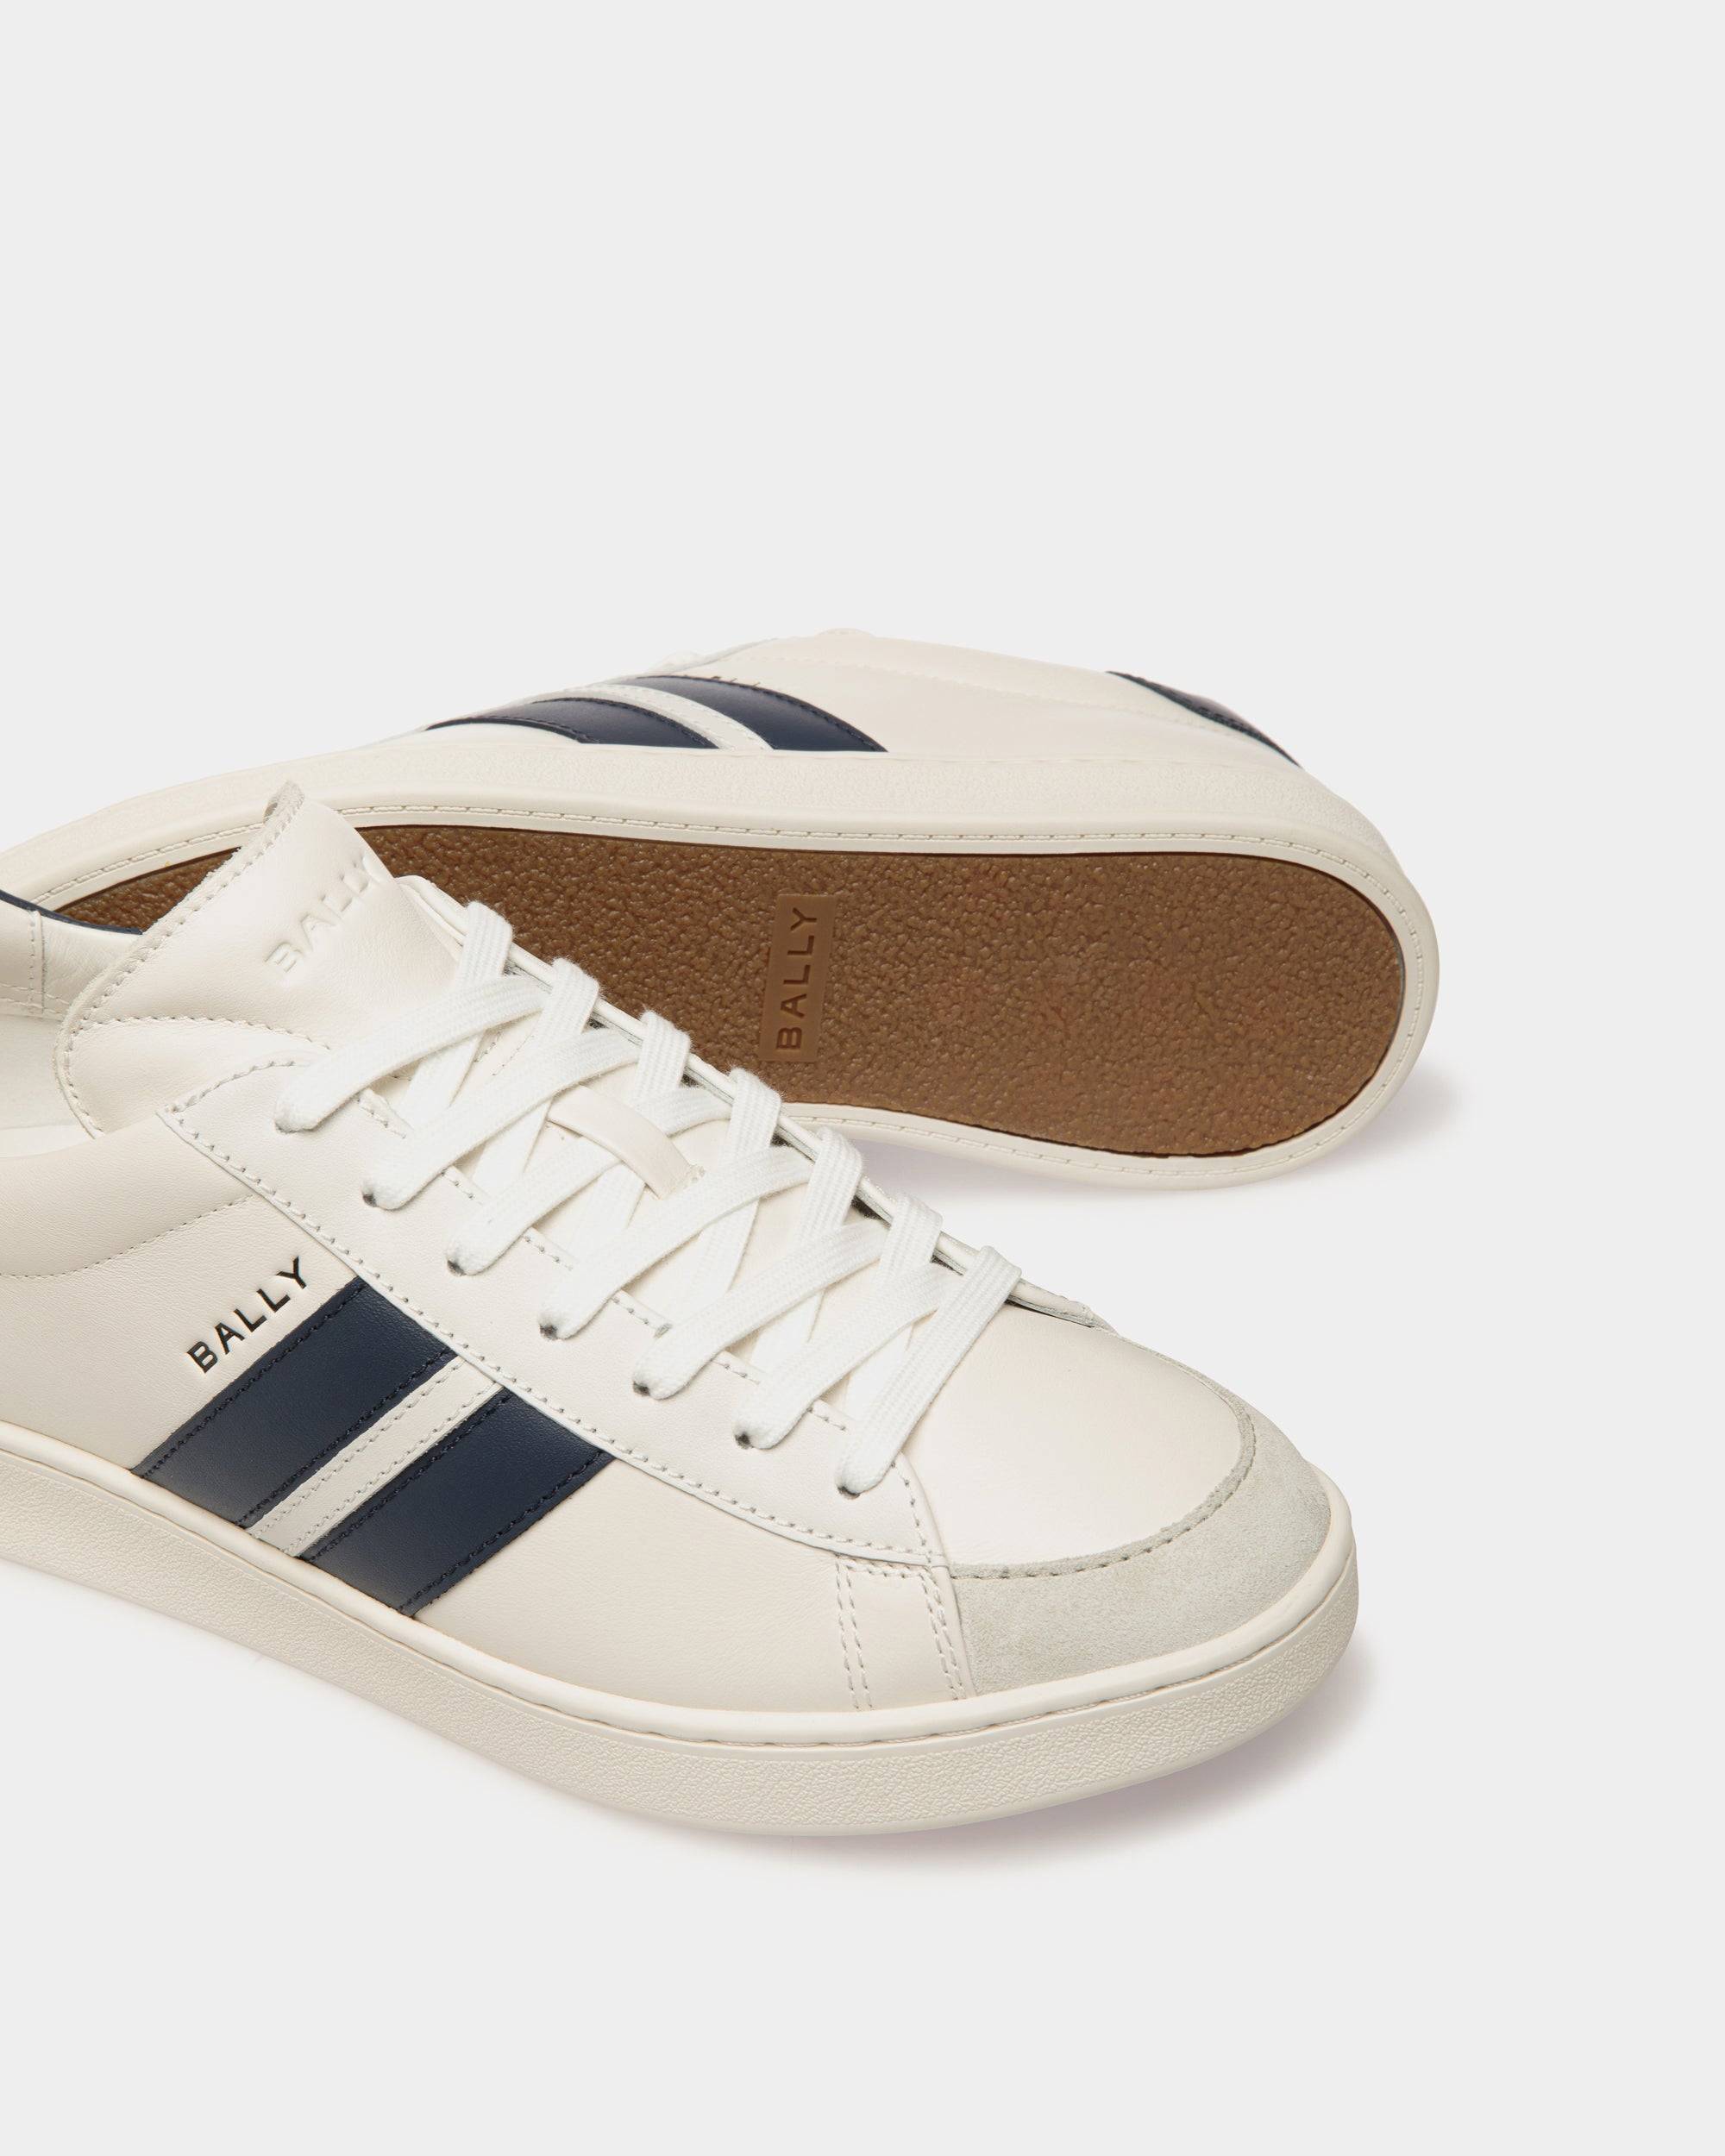 Tennis Sneaker in White and Navy Blue Leather - Men's - Bally - 05